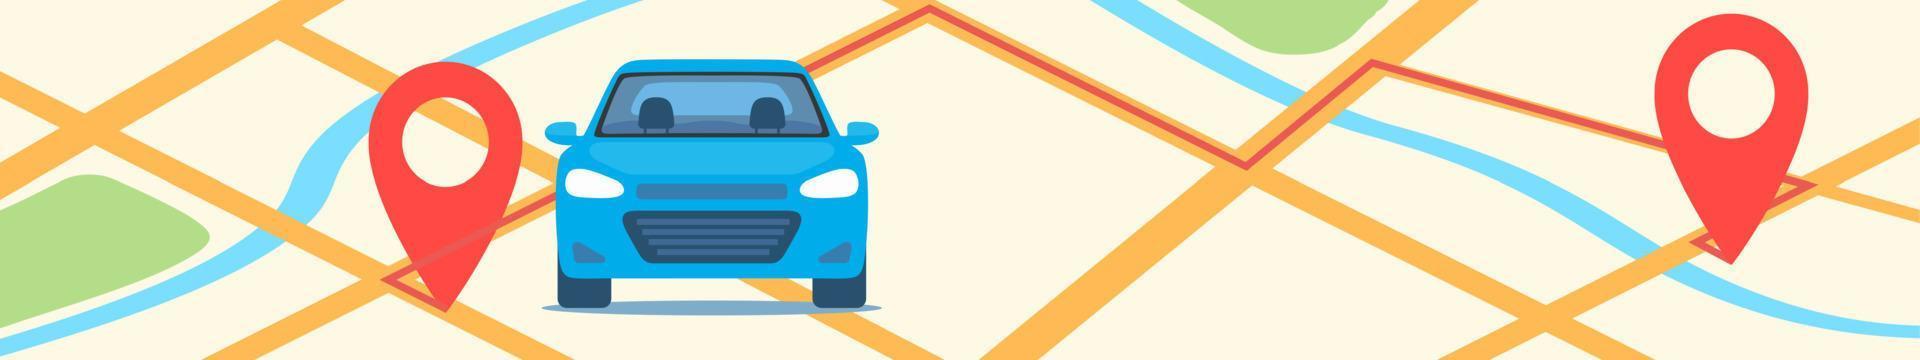 Car on city map with red pins and route between them. Horizontal banner template. GPS navigator or car sharing concept illustration, vector. vector